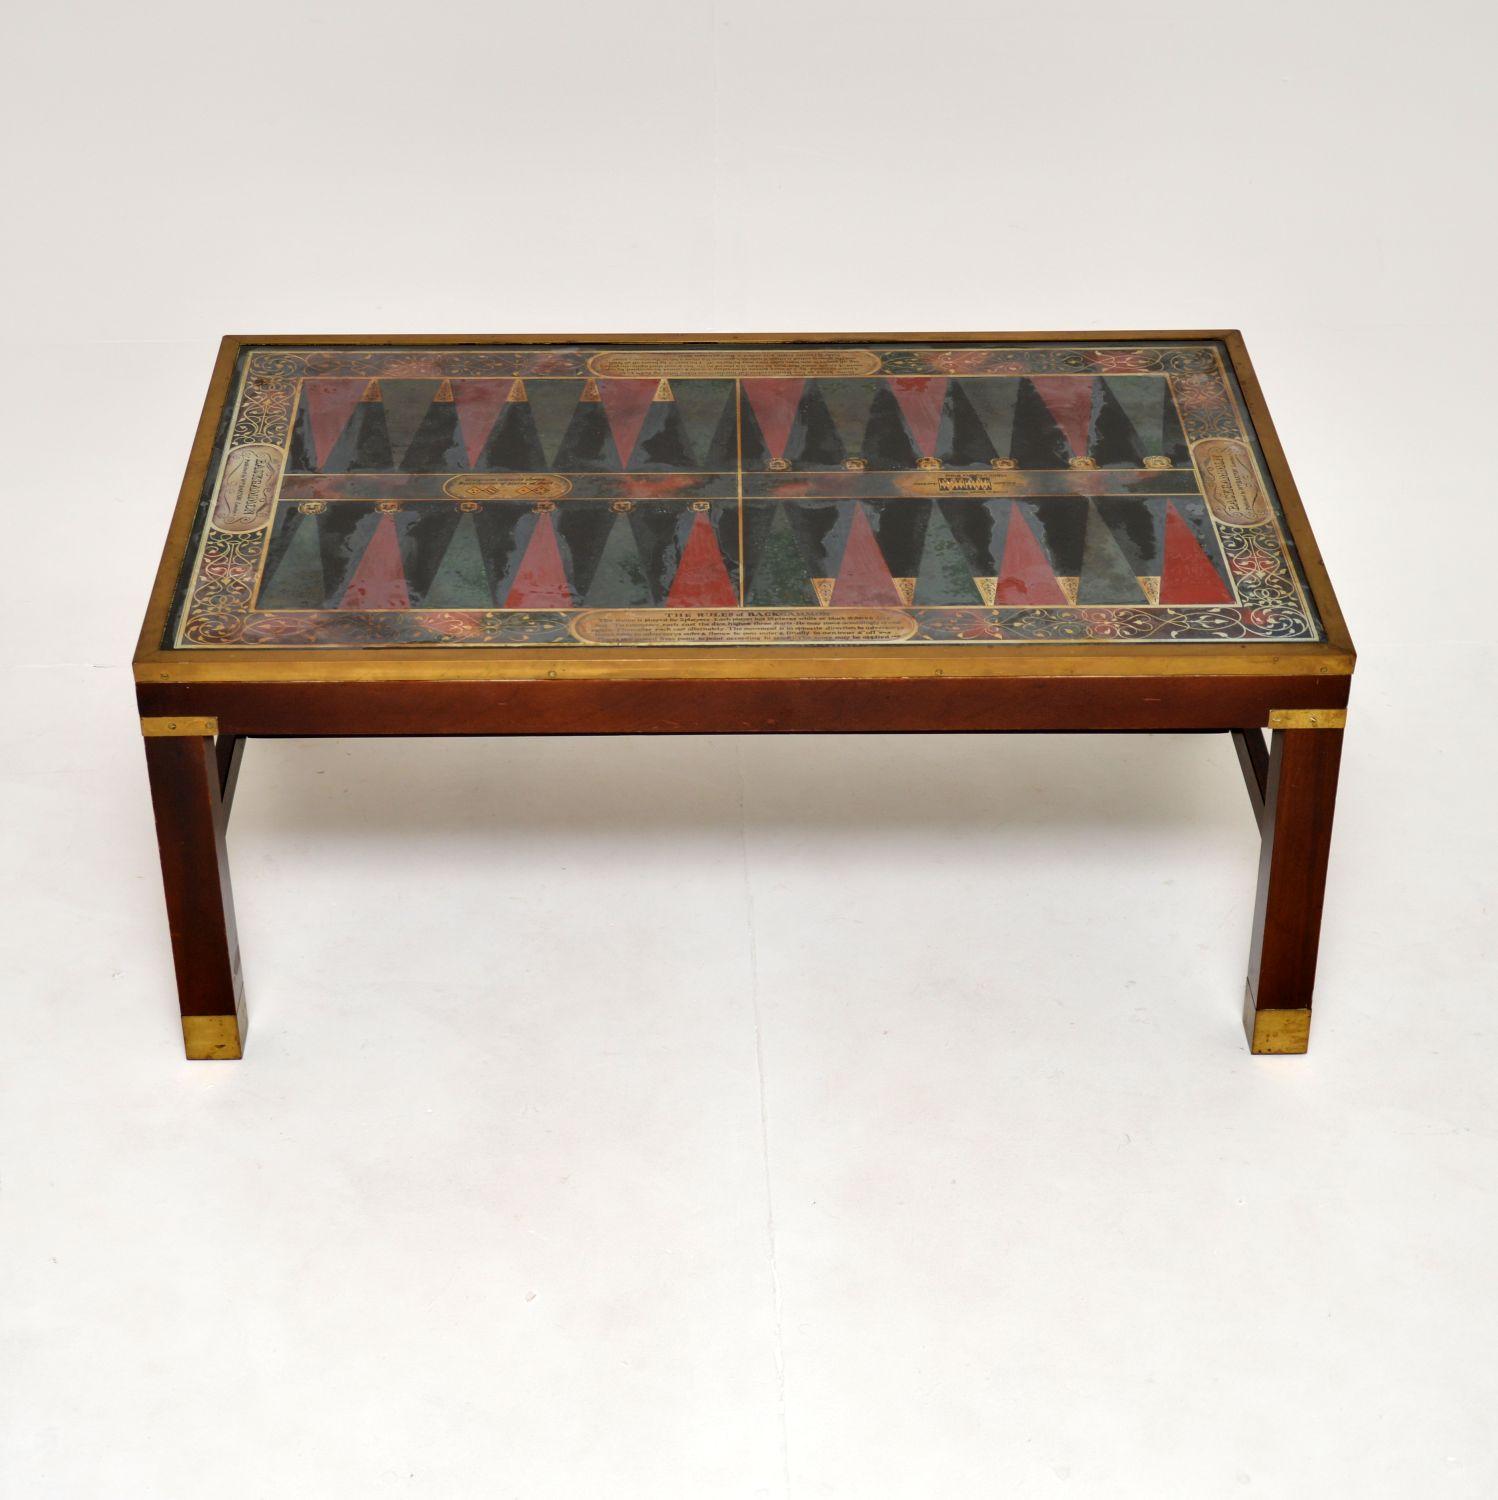 A fantastic antique military, campaign style coffee table. This was made in England, it dates from around the 1950’s.

It is of superb quality and has an unusual glass top with a large backgammon board design. It is beautifully designed and has the